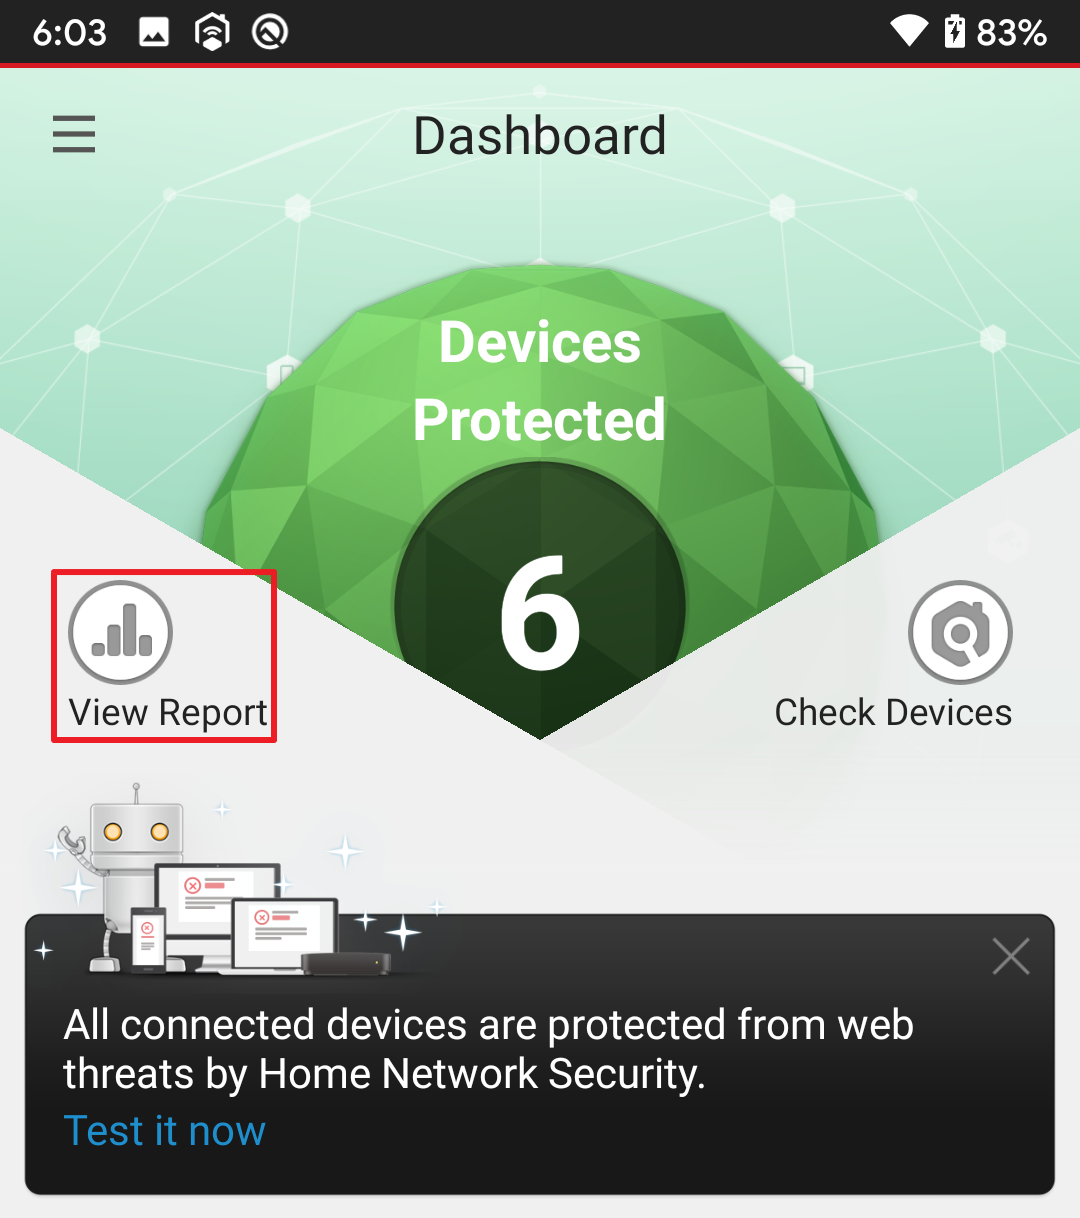 View Security Events Report in Trend Micro Home Network Security